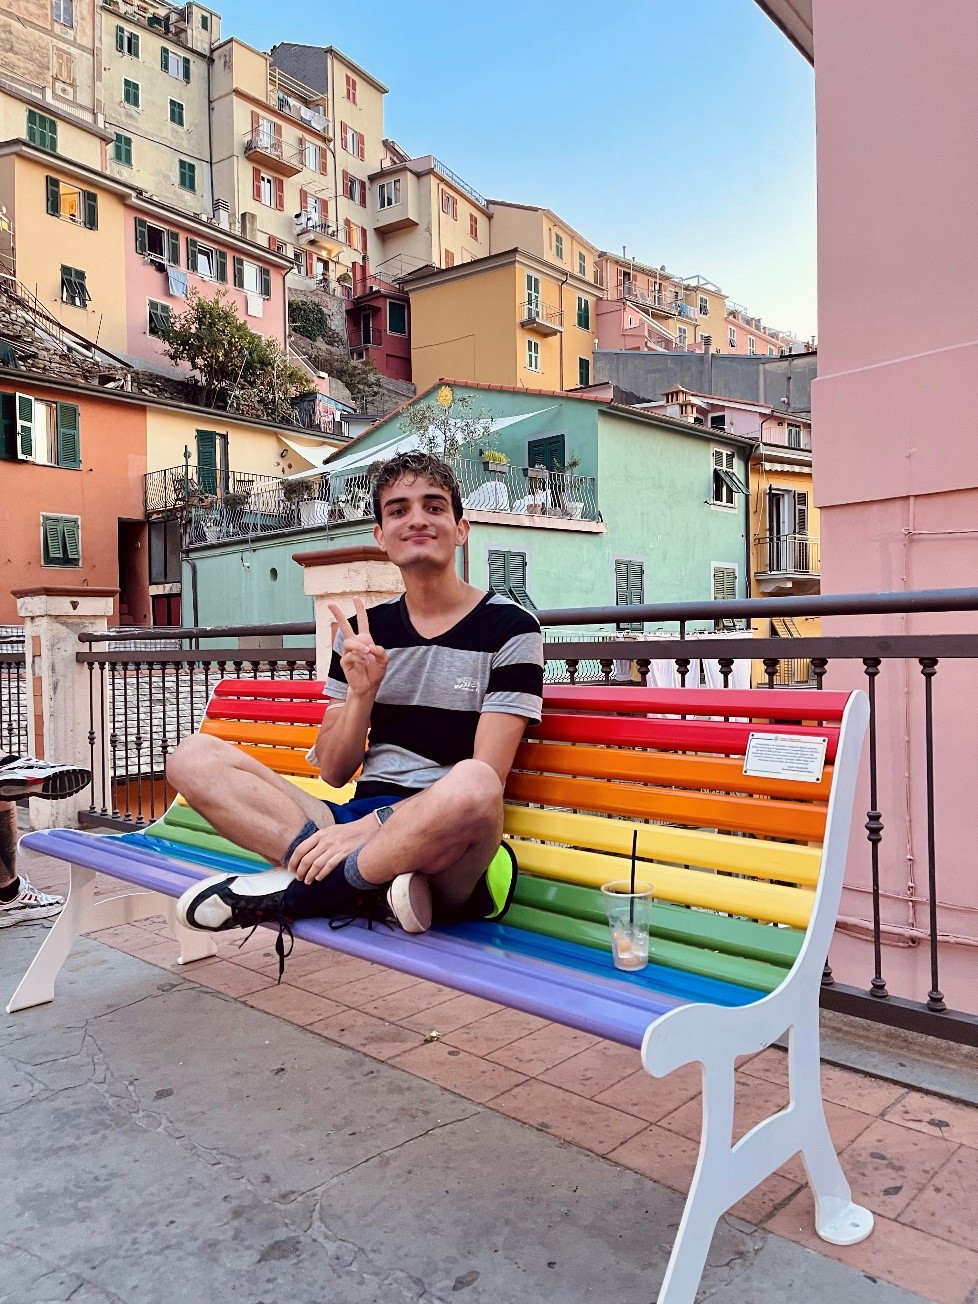 Gus is sitting on a rainbow bench. He is smiling and holding up a peace sign. 